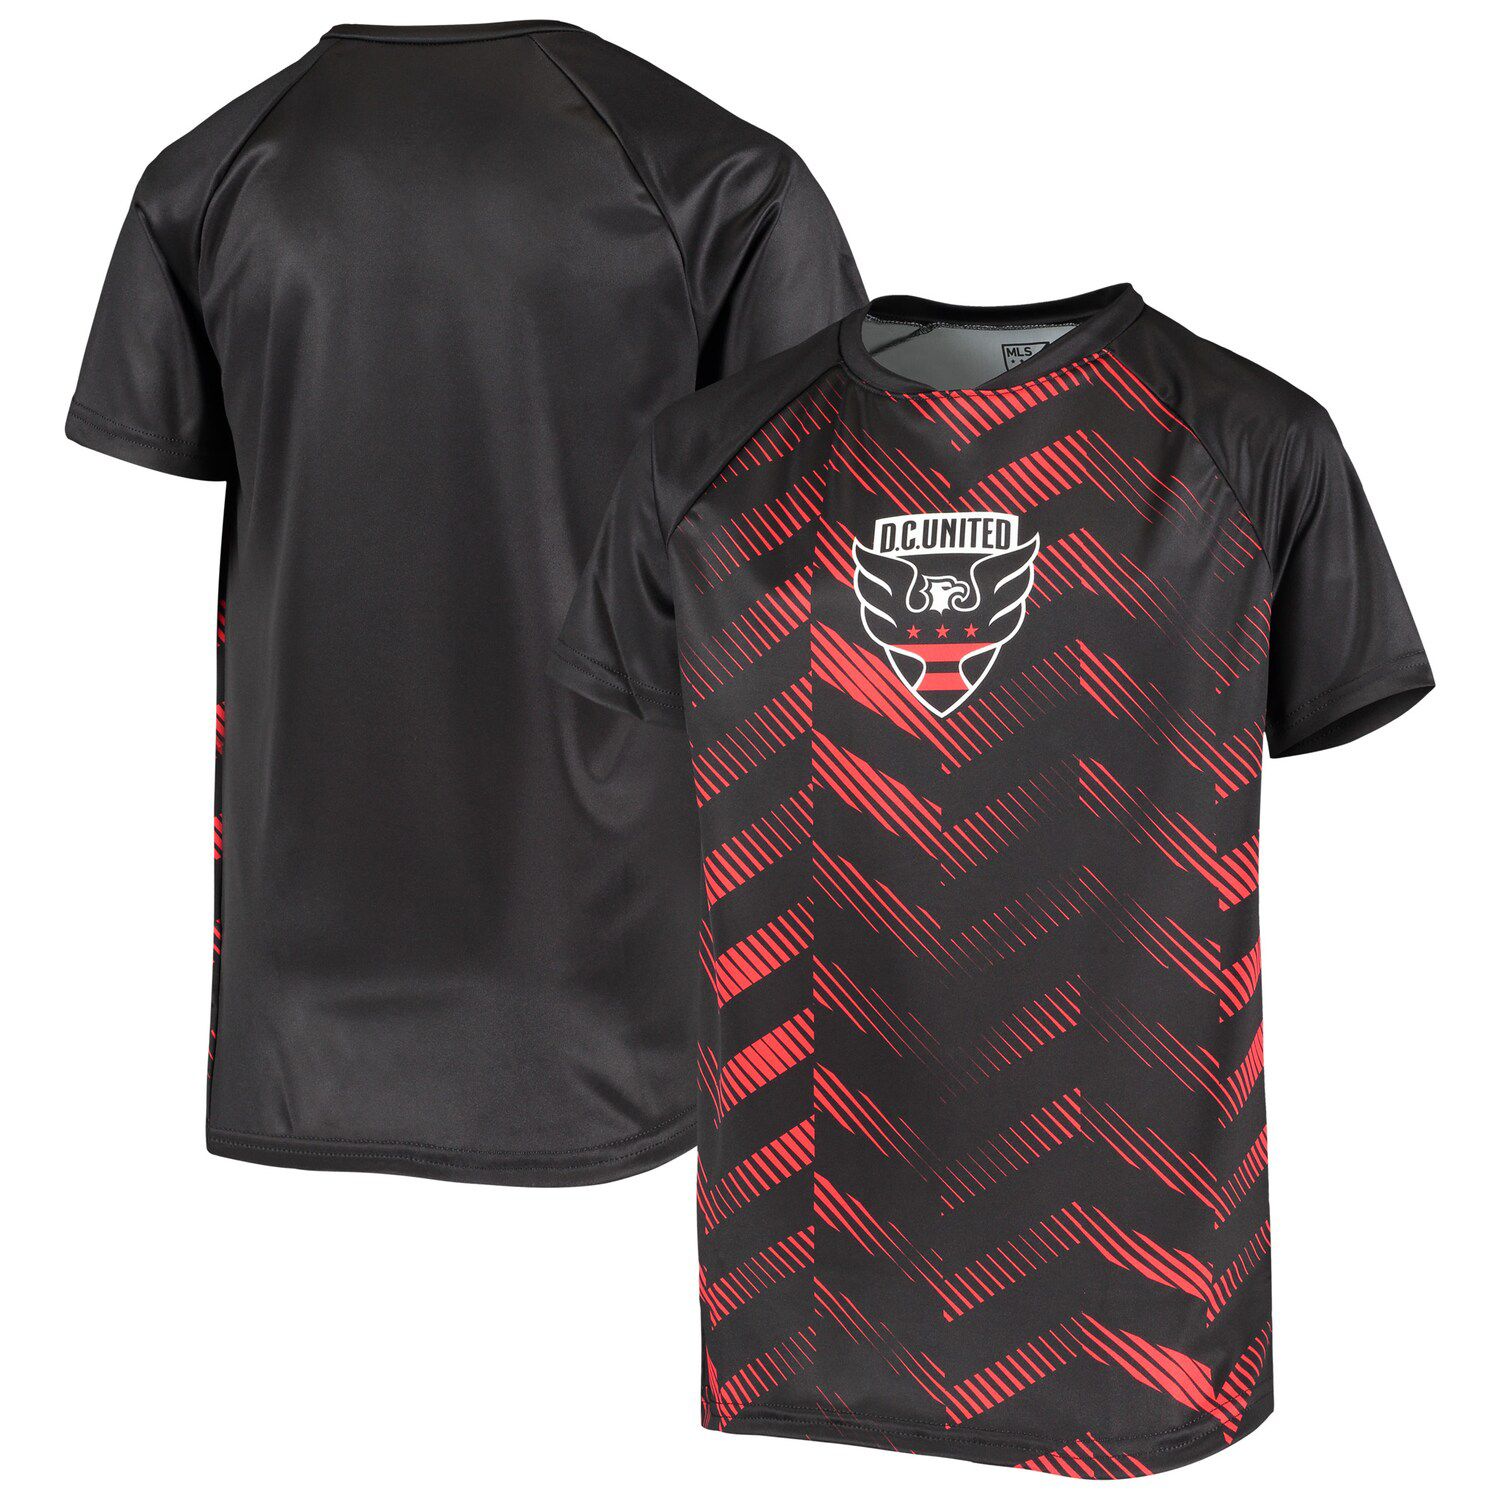 2020 Team Shutout Sublimated Jersey